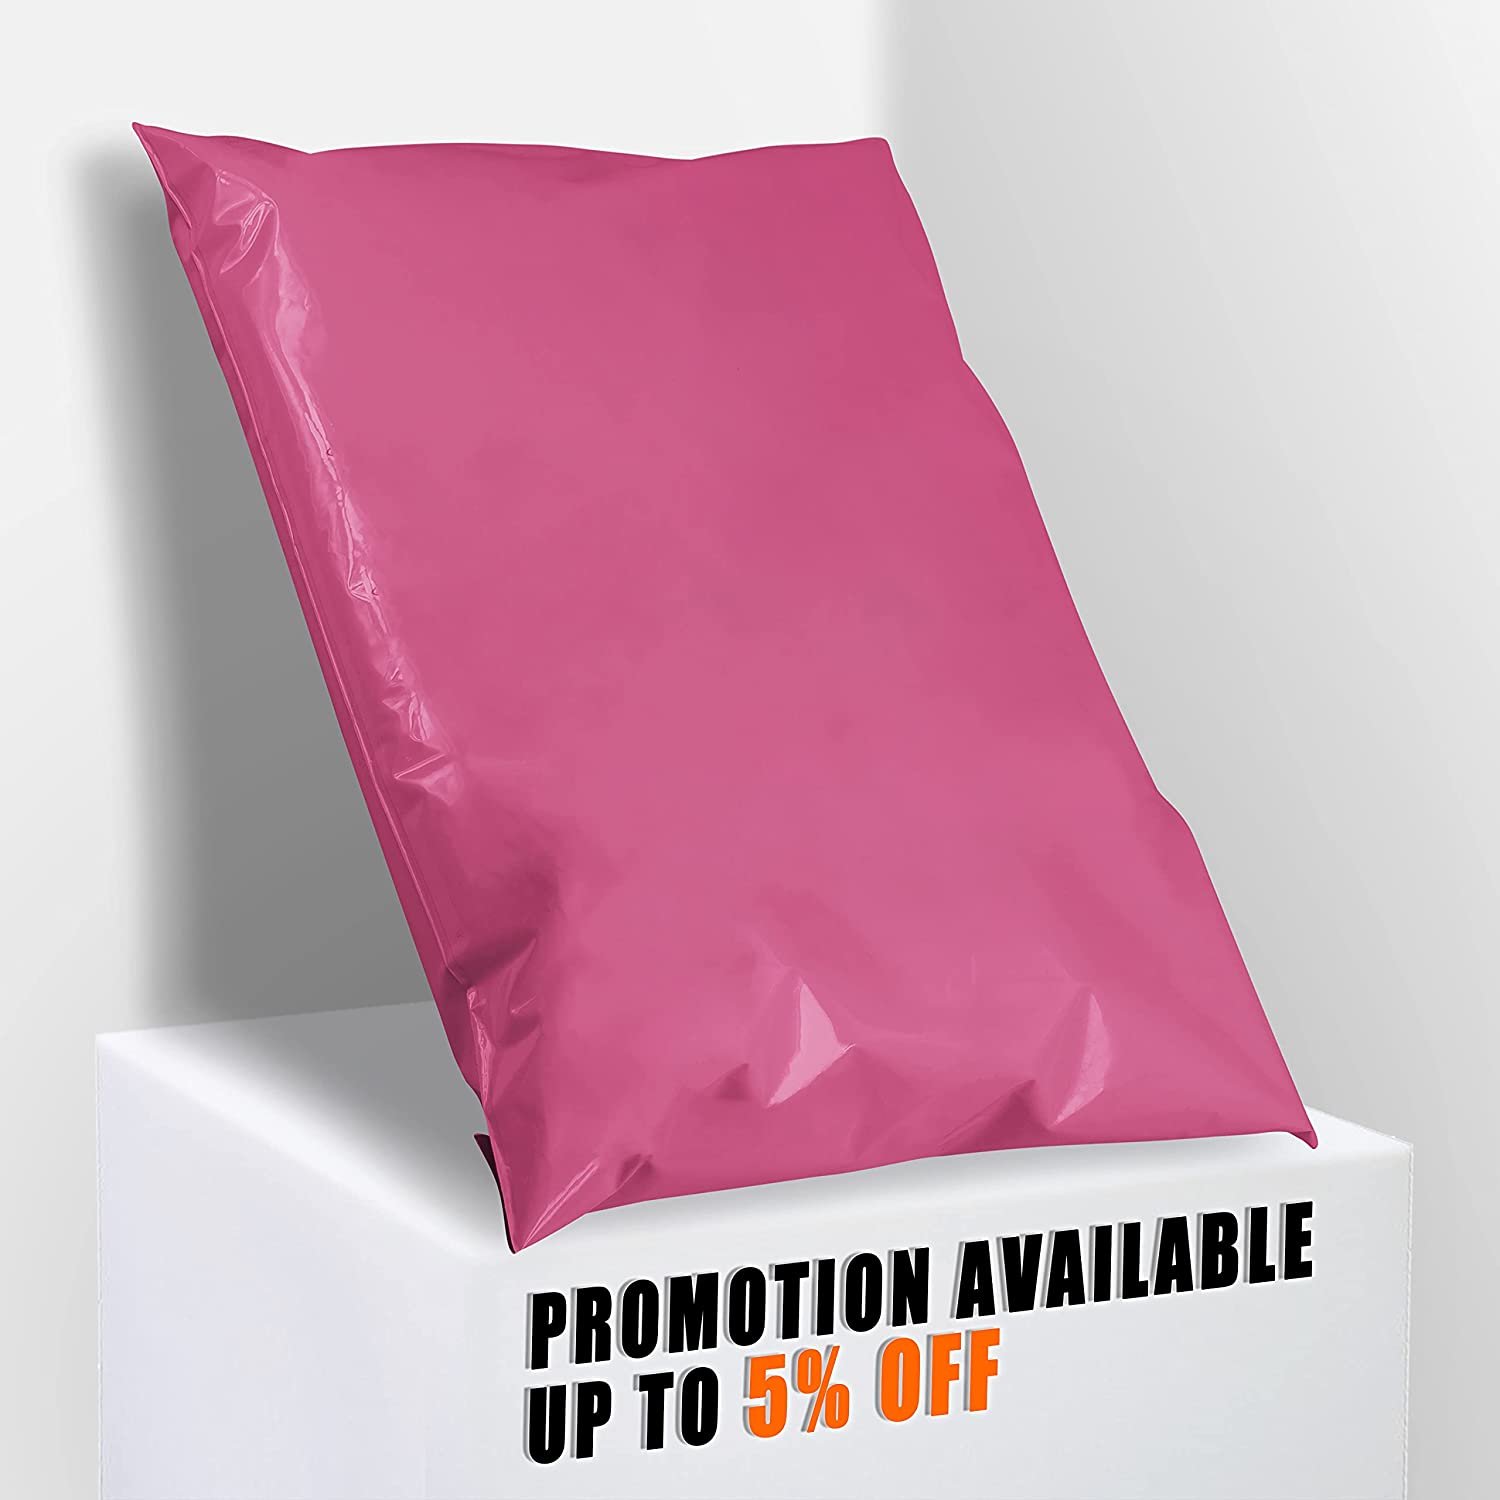 Hot Pink Poly Mailers 12 x 15.5, and Seal Shipping for Small Business Pack of Waterproof Shipping Envelopes for Clothing 2 Mil, Tear-Proof Plastic Mailing Bags for Shipping - Walmart.com